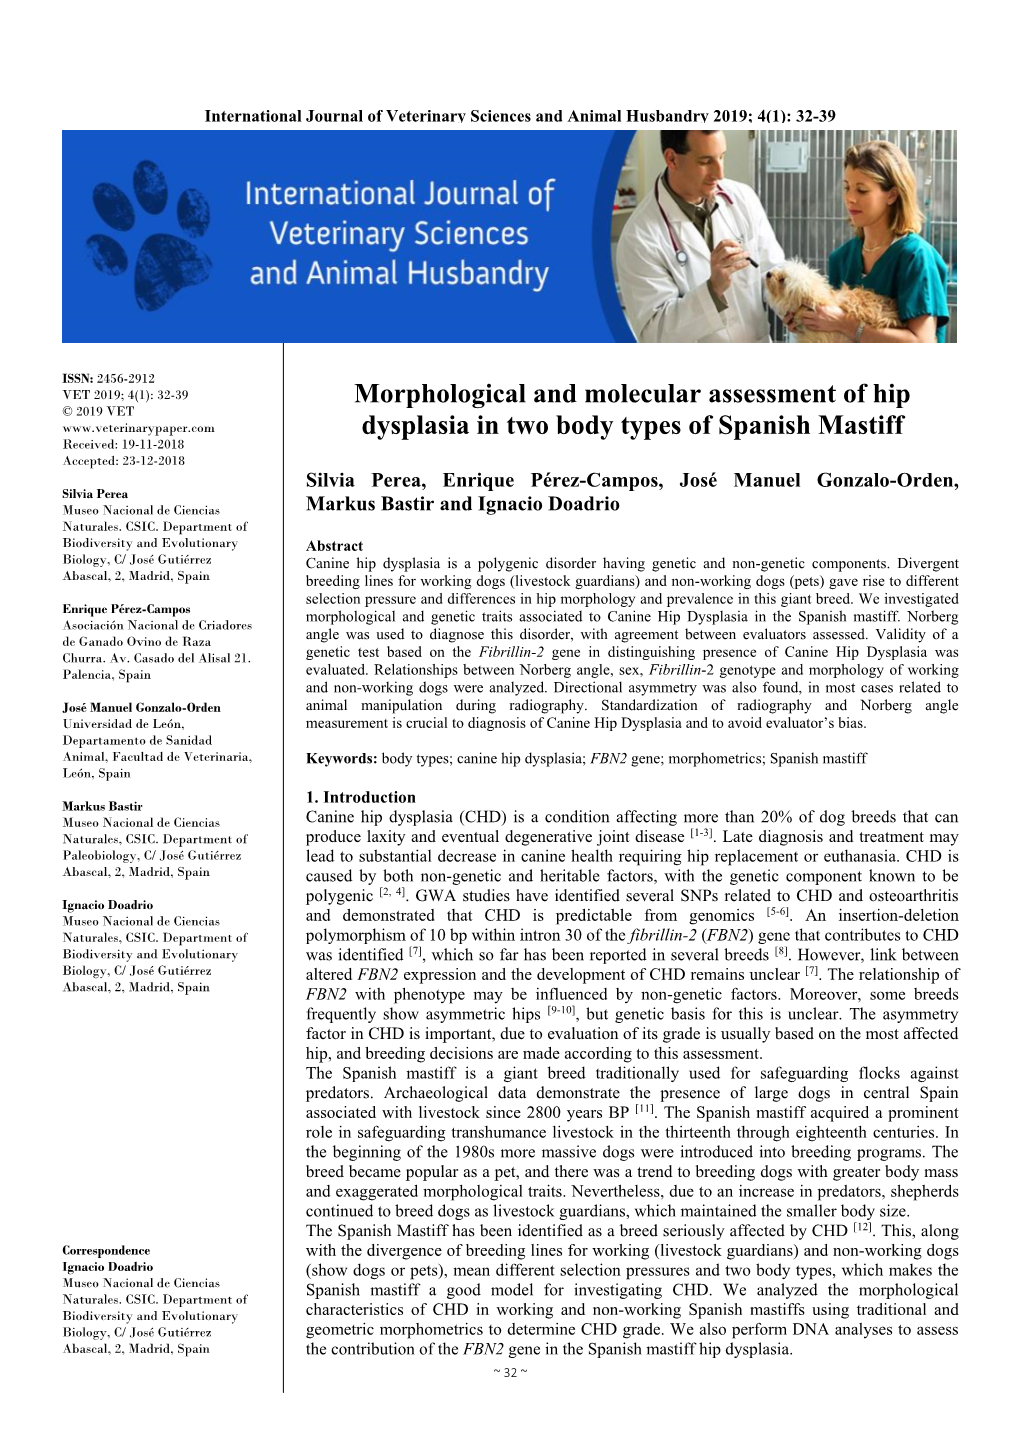 Morphological and Molecular Assessment of Hip Dysplasia in Two